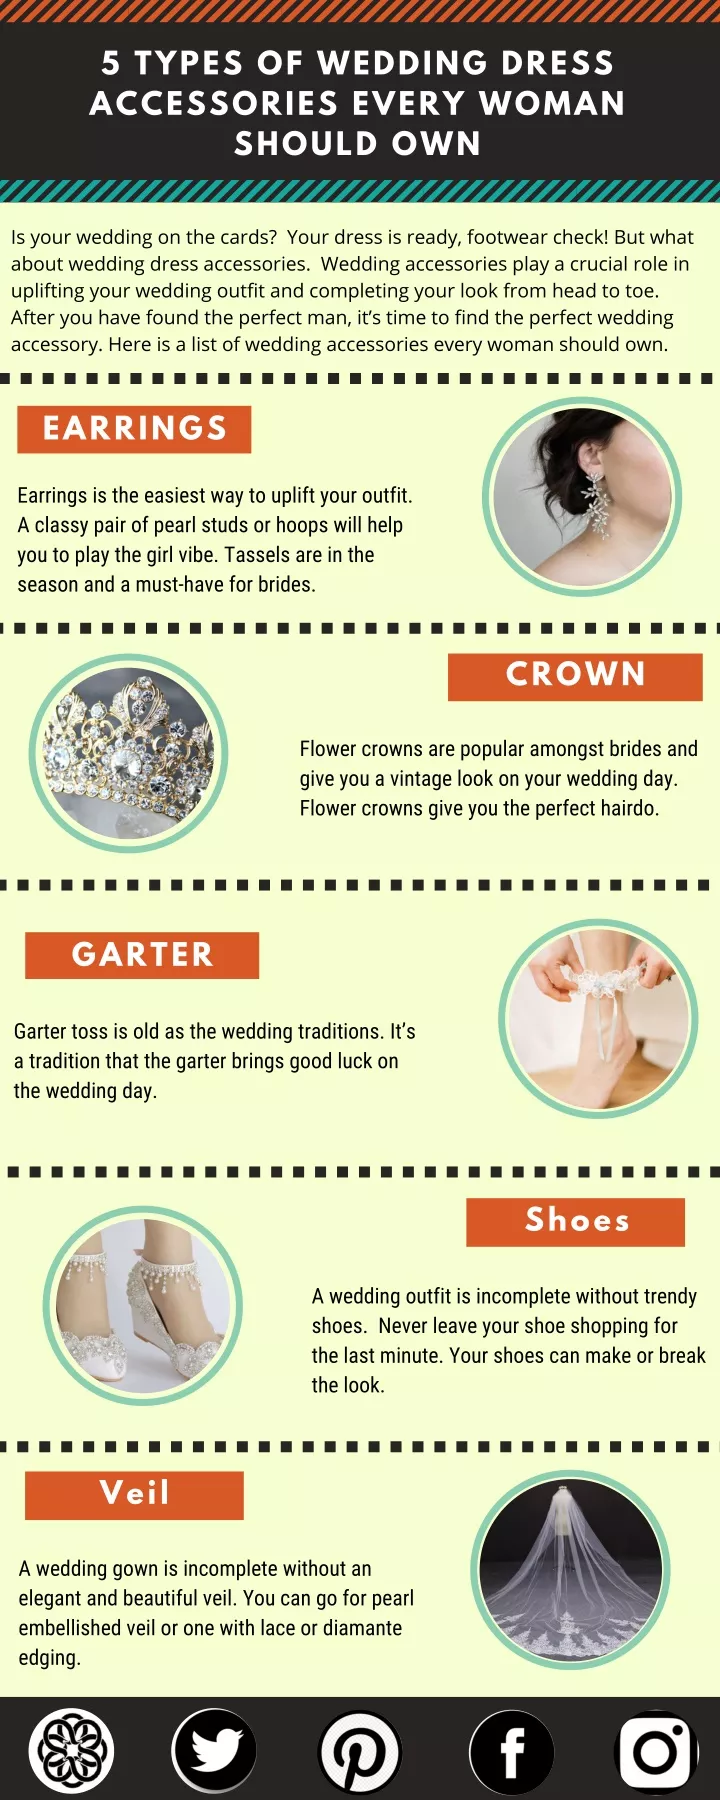 5 types of wedding dress accessories every woman